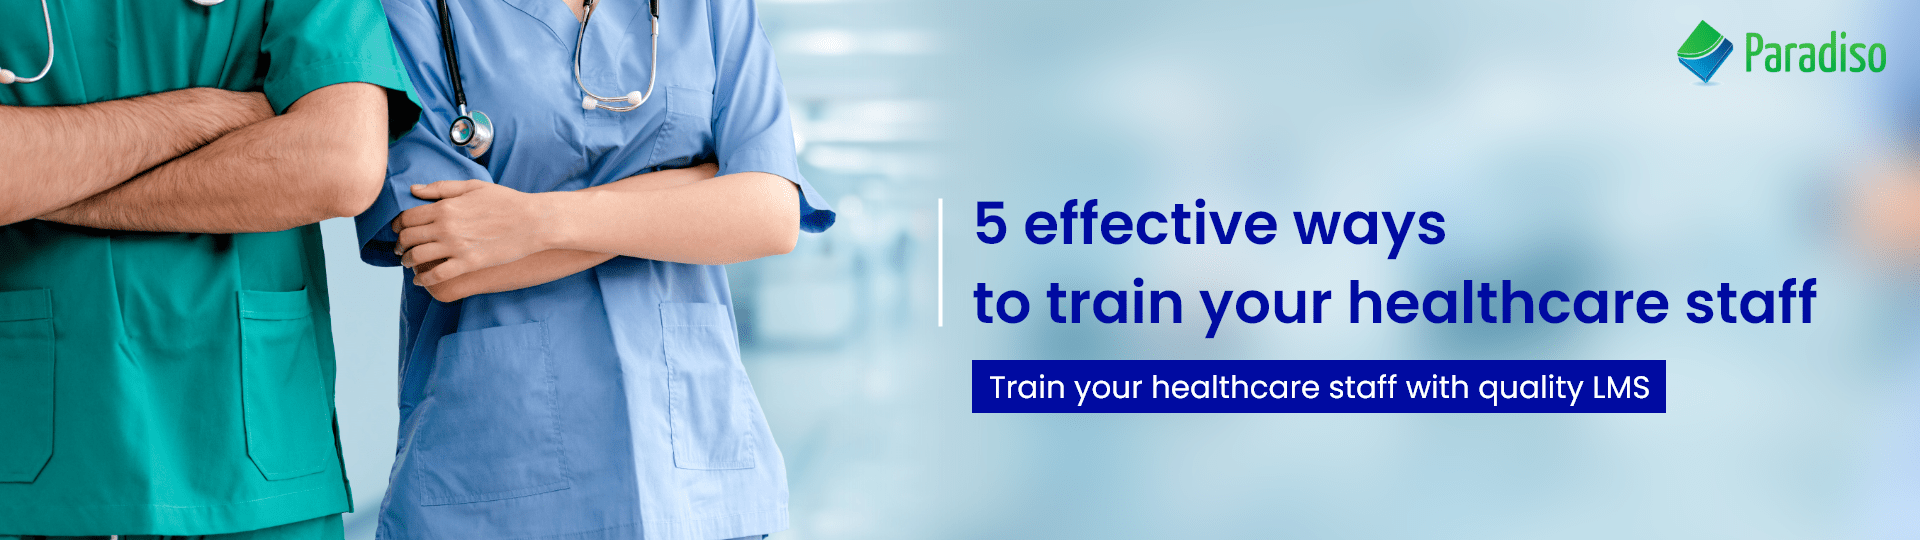 5 effective ways to train your healthcare staff